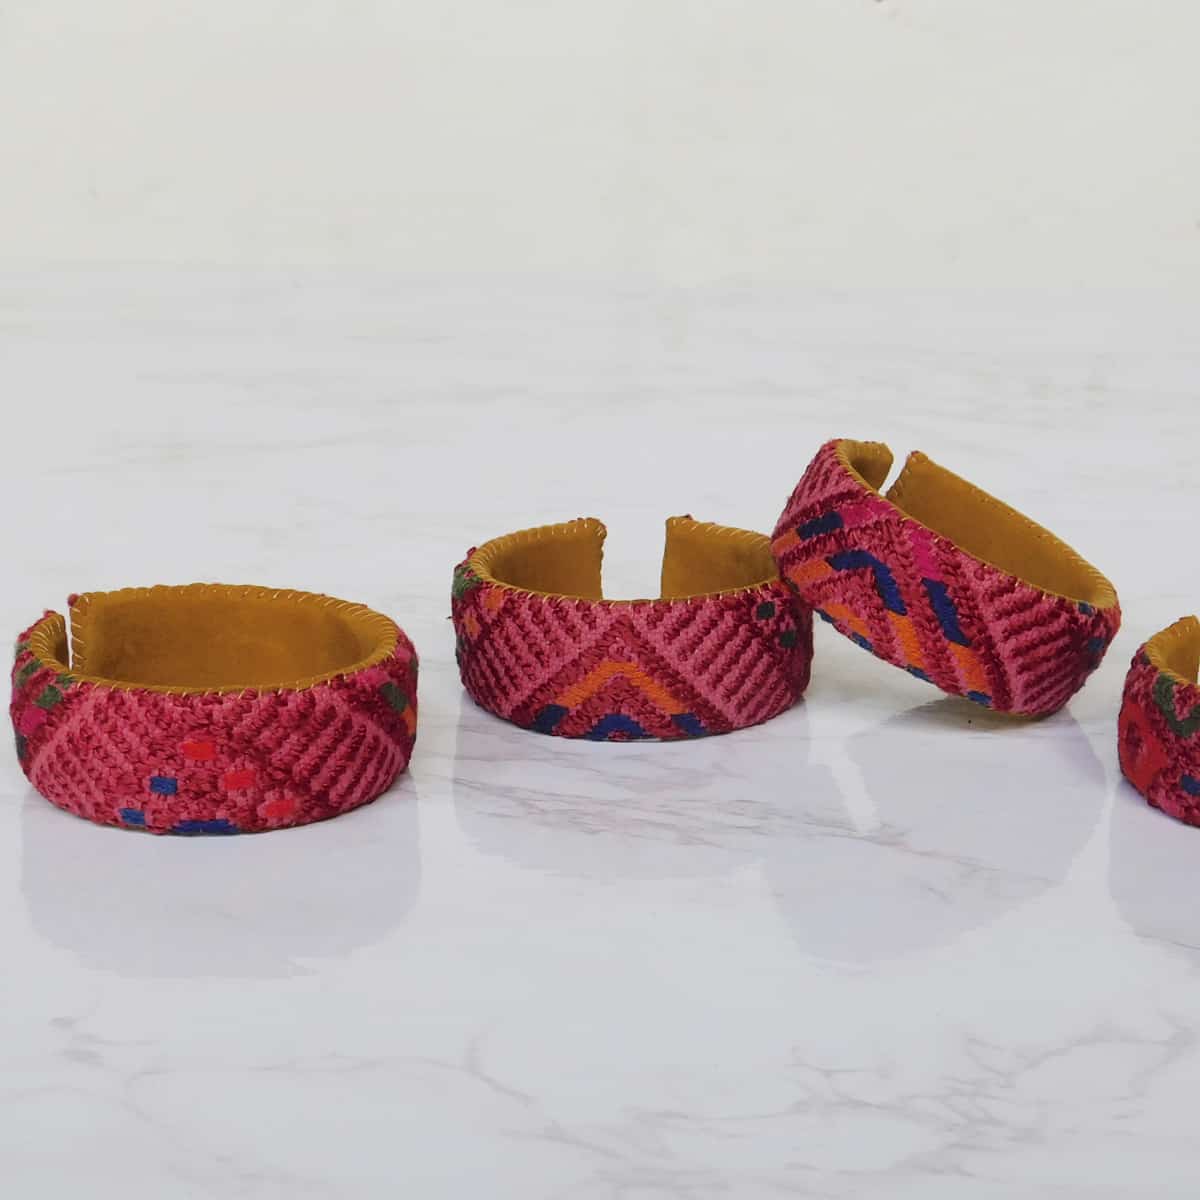  A set of four leather forearm cuffs with red corte fabric from Guatemala